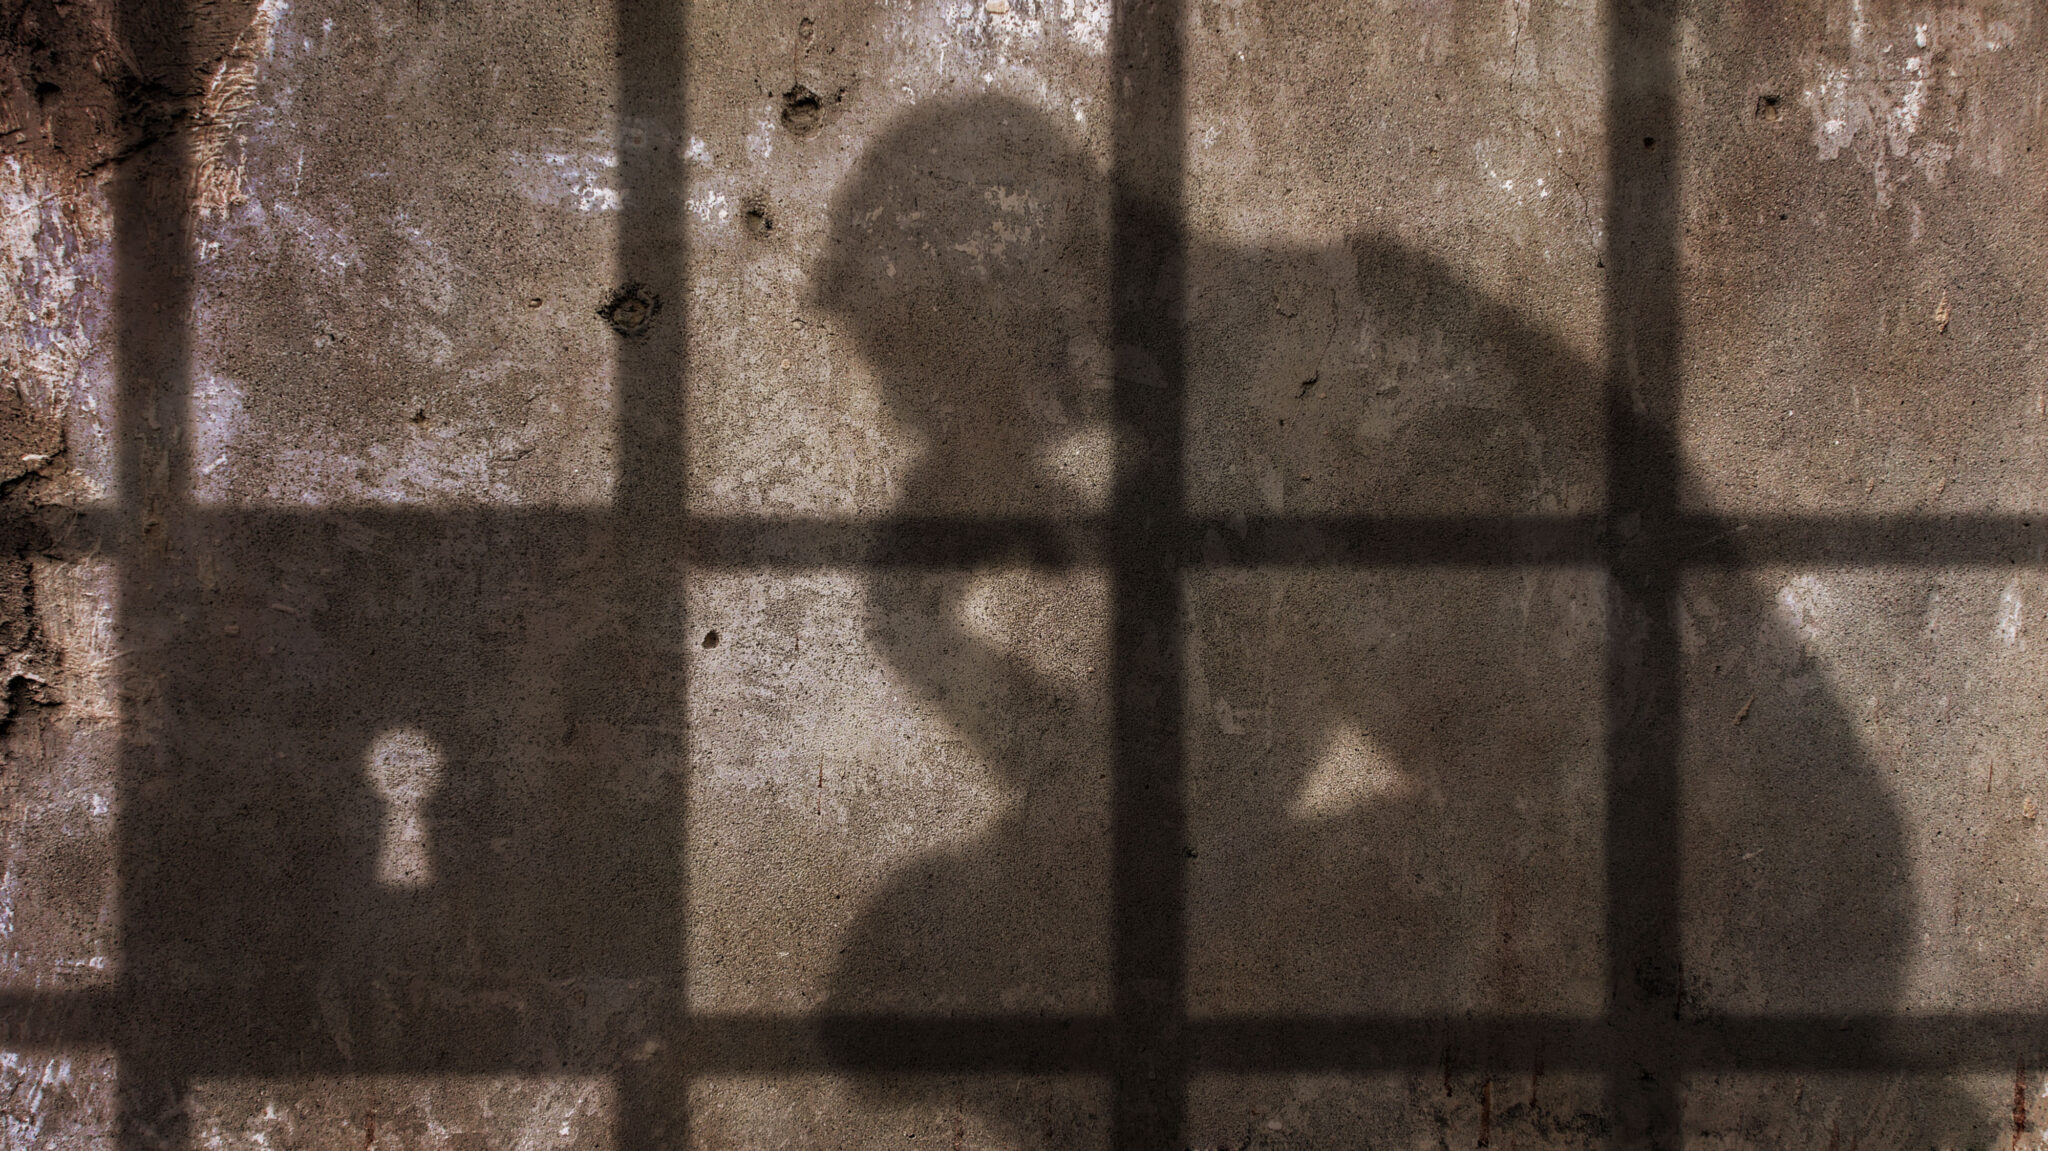 A man's shadow (sitting down, leaning forward with hands on knees) is seen behind the bars of a prison cell.